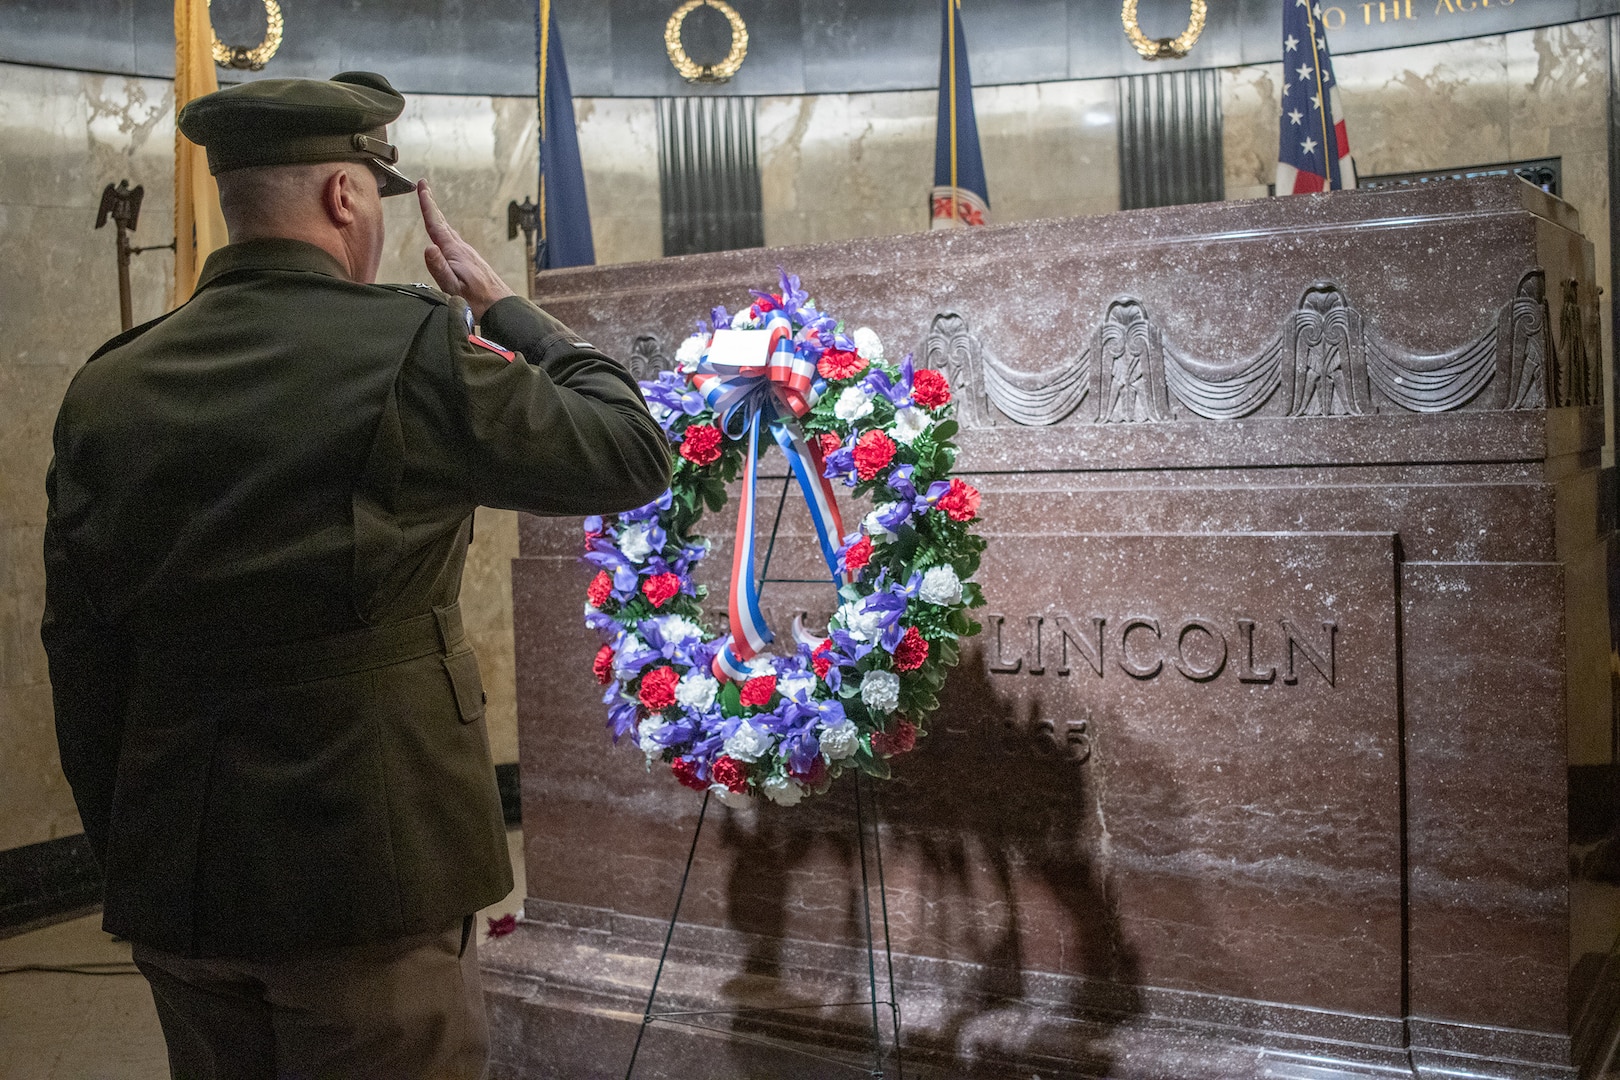 Brig. Gen. Mark Alessia renders a salute after placing a wreath at the tomb of President Abraham Lincoln on behalf of the President of the United States Feb. 12, as part of the 90th annual American Legion Pilgrimage to Lincoln’s Tomb at Oak Ridge Cemetery, Springfield, Illinois.